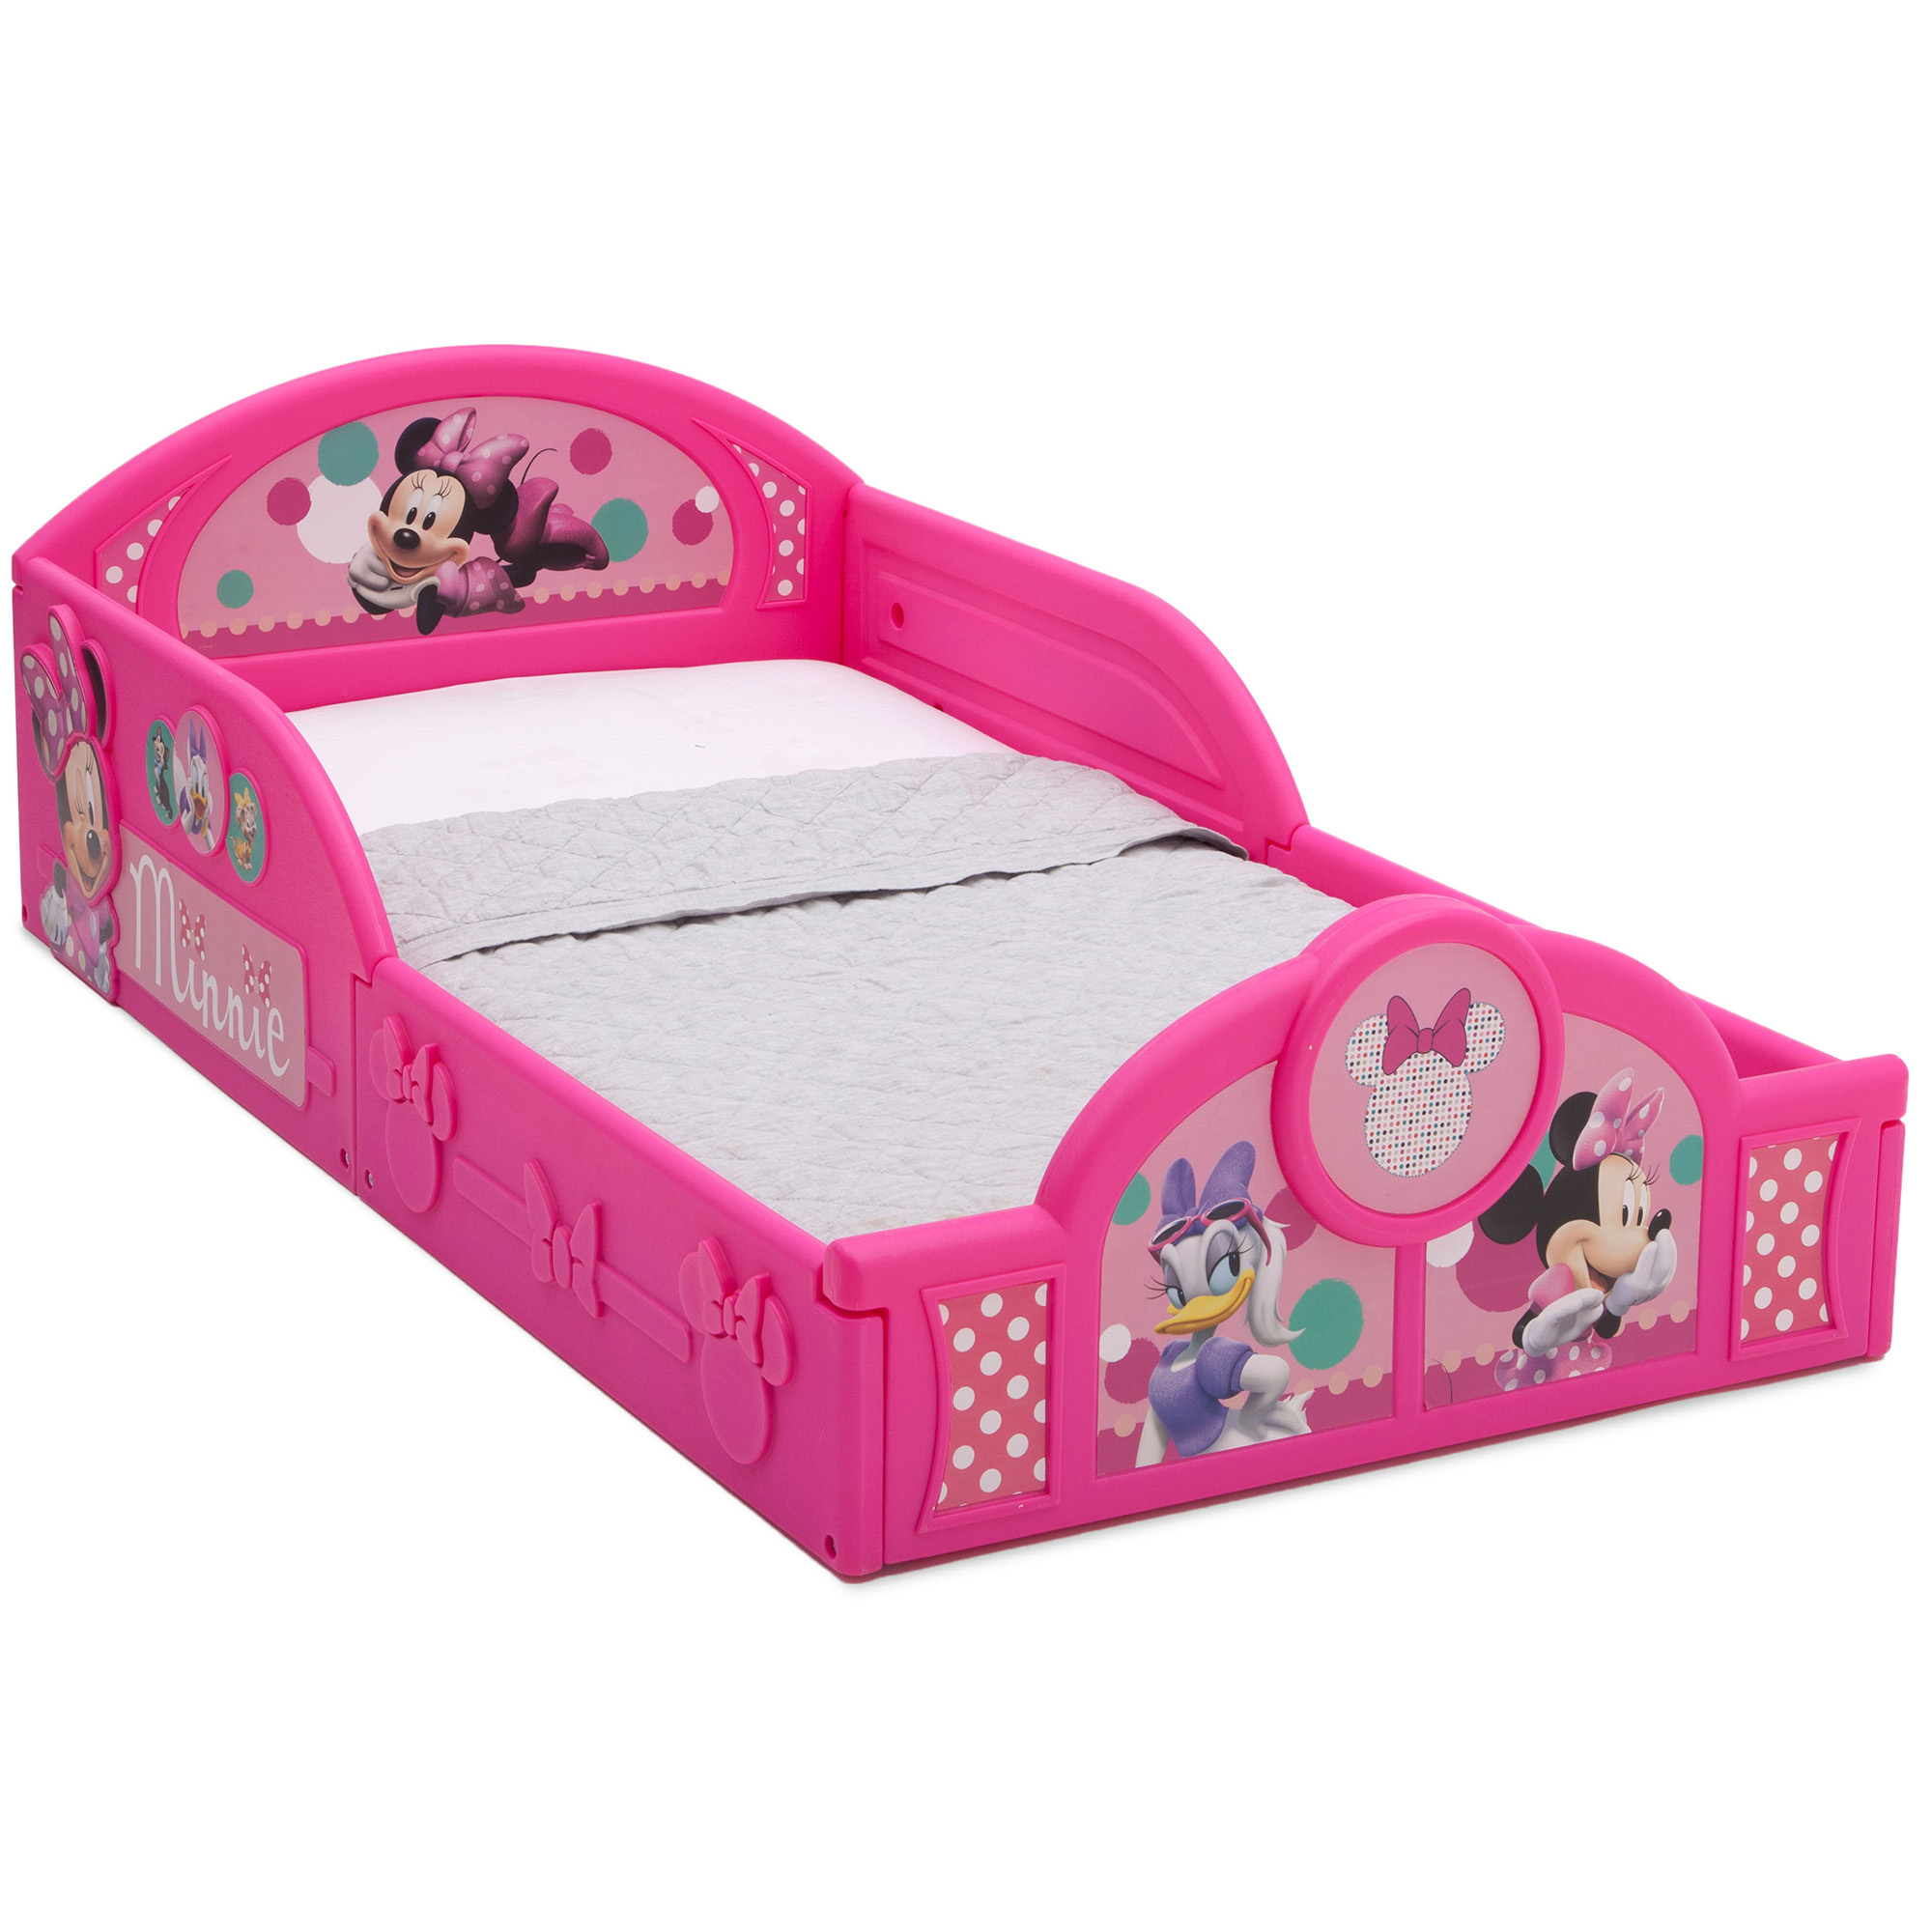 Disney Minnie Mouse Plastic Sleep and Play Toddler Bed by Delta Children - image 1 of 9